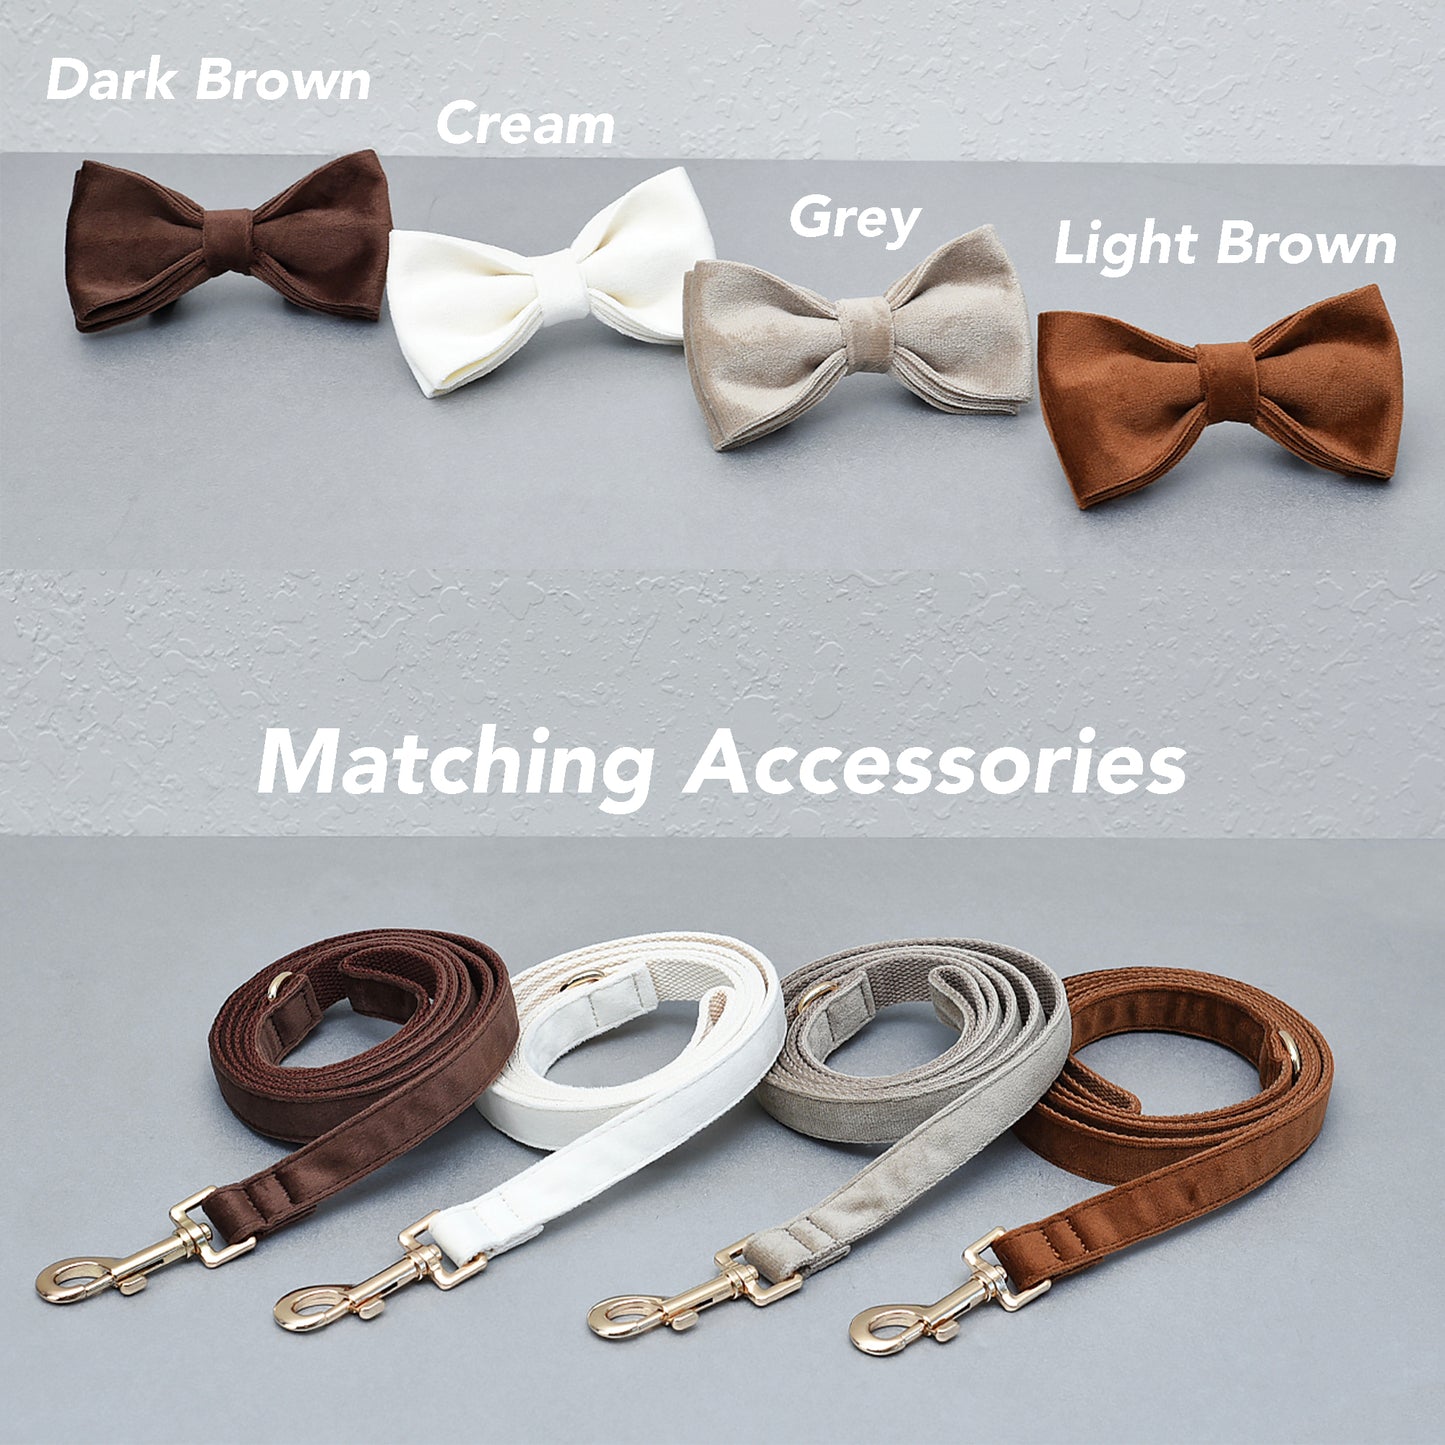 Personalized Dog Collar, Multiple Colors Velvet, Leash Set with Bow,Brown,Grey,White,Engraved Pet Name Plate Metal Buckle,Wedding Puppy Gift